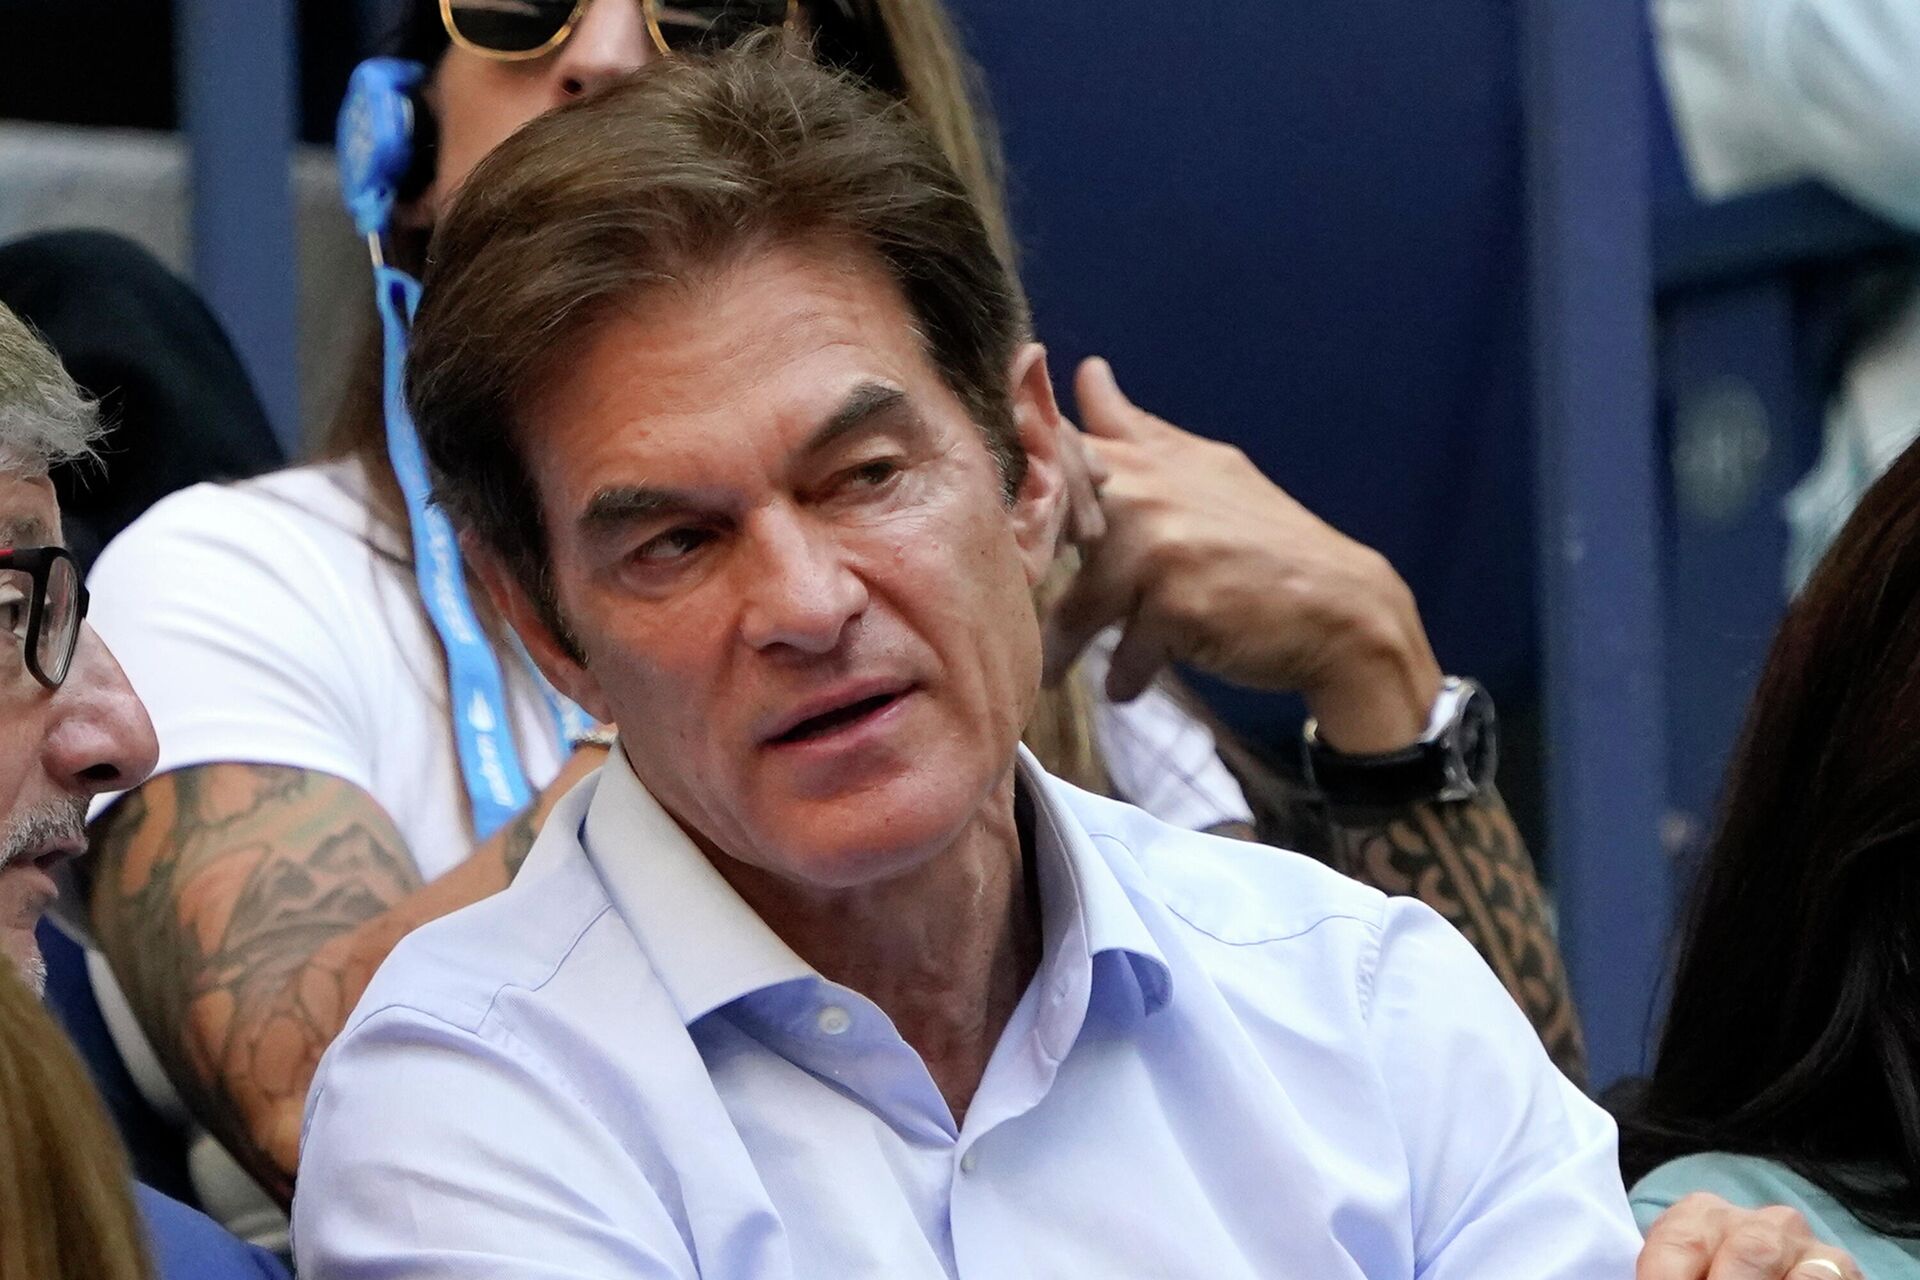 Dr. Oz watches play during the women's singles final of the US Open tennis championships, in this file photo from Sept. 11, 2021, in New York. Mehmet Oz is running in the wide-open race for the Pennsylvania seat being vacated by two-term Republican Sen. Pat Toomey. The race has attracted wealthy and well-connected transplants, and homers. - Sputnik International, 1920, 23.06.2022